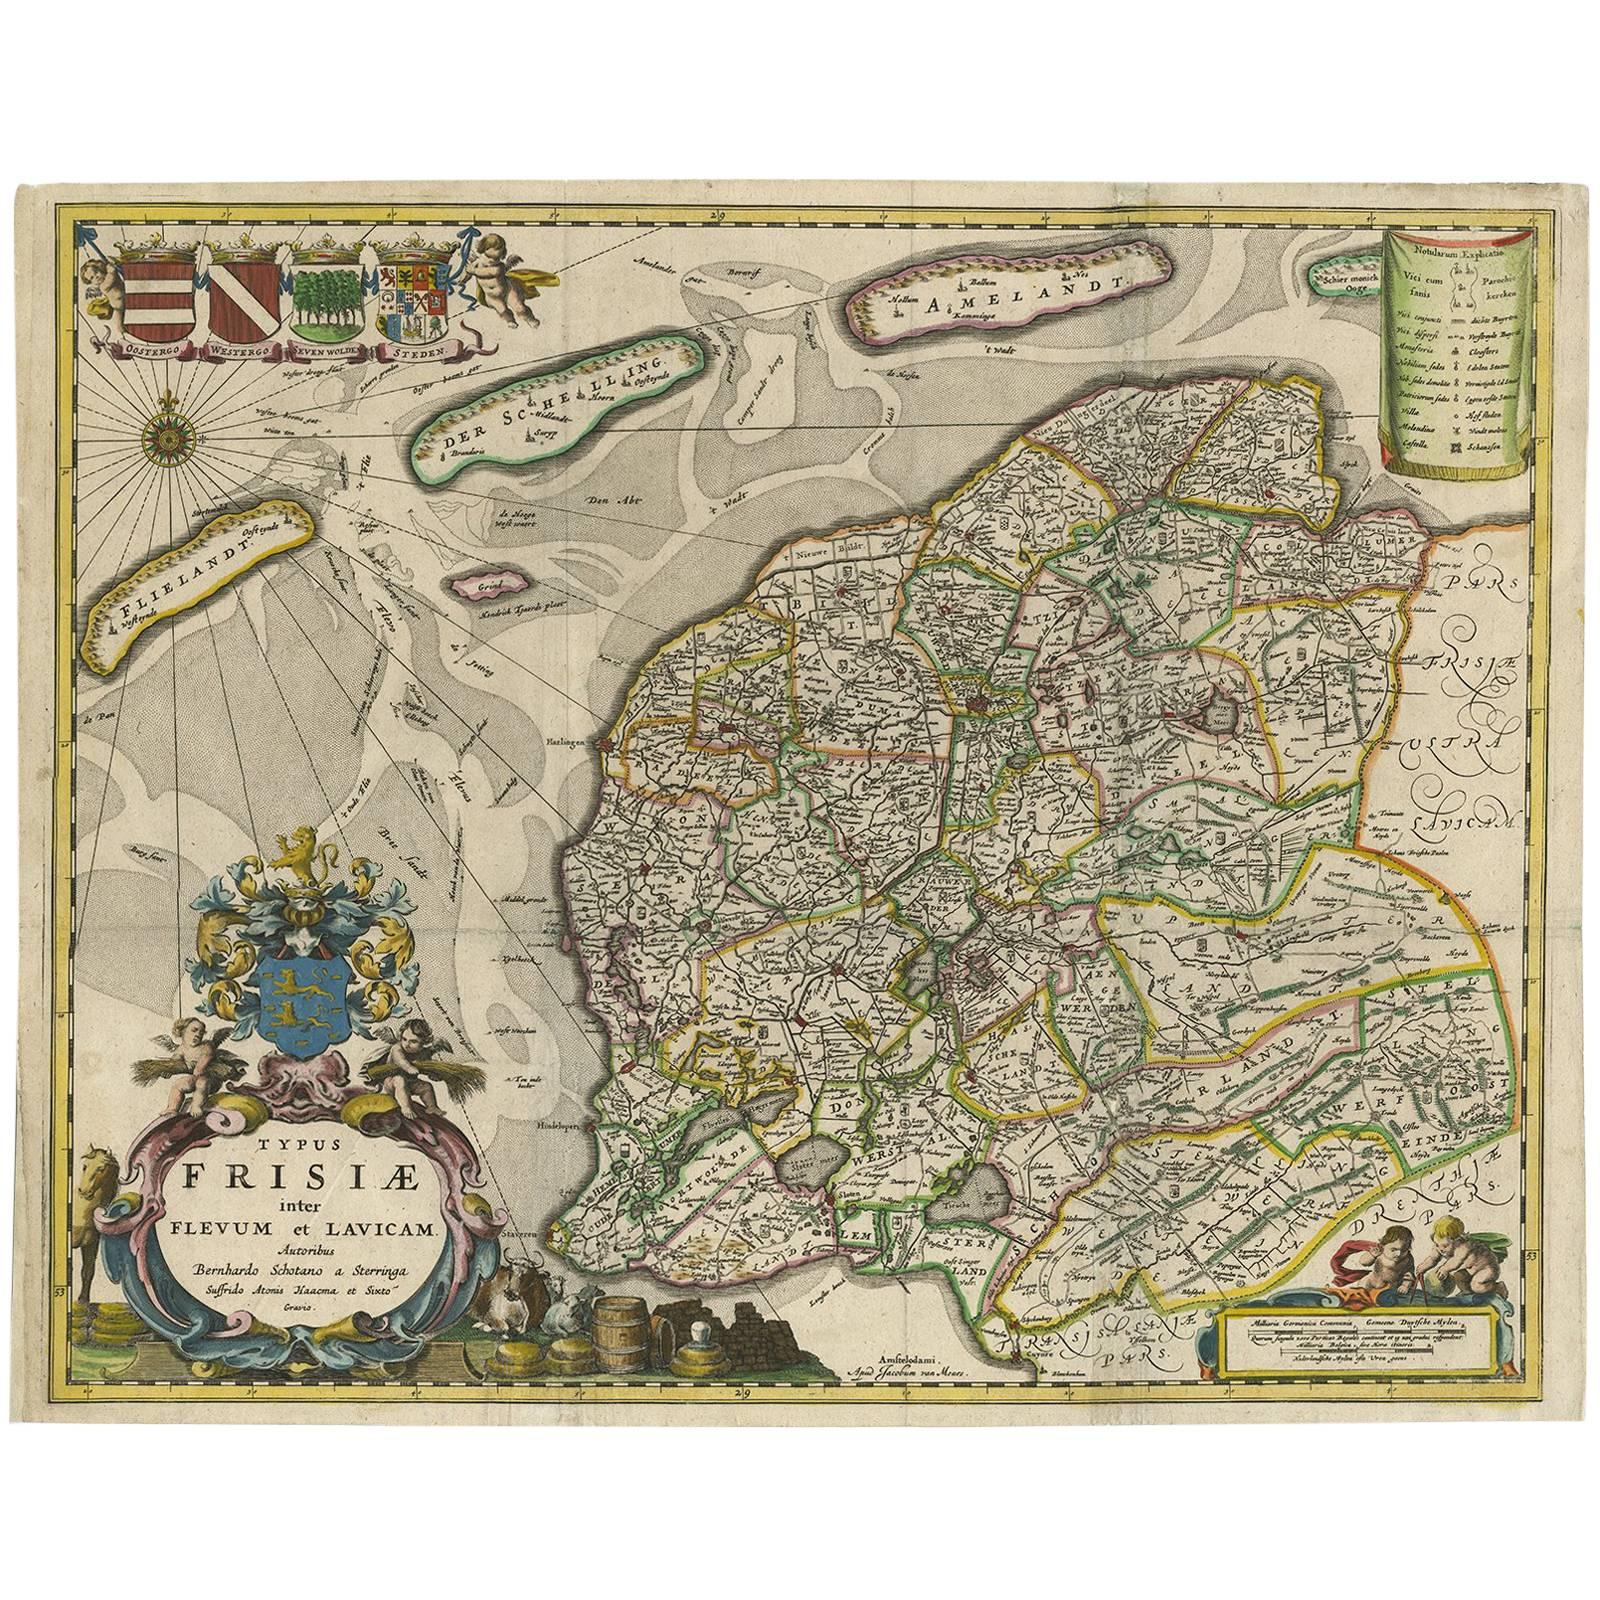 Antique Map of Friesland 'The Netherlands' by B. Schotanus, 1664